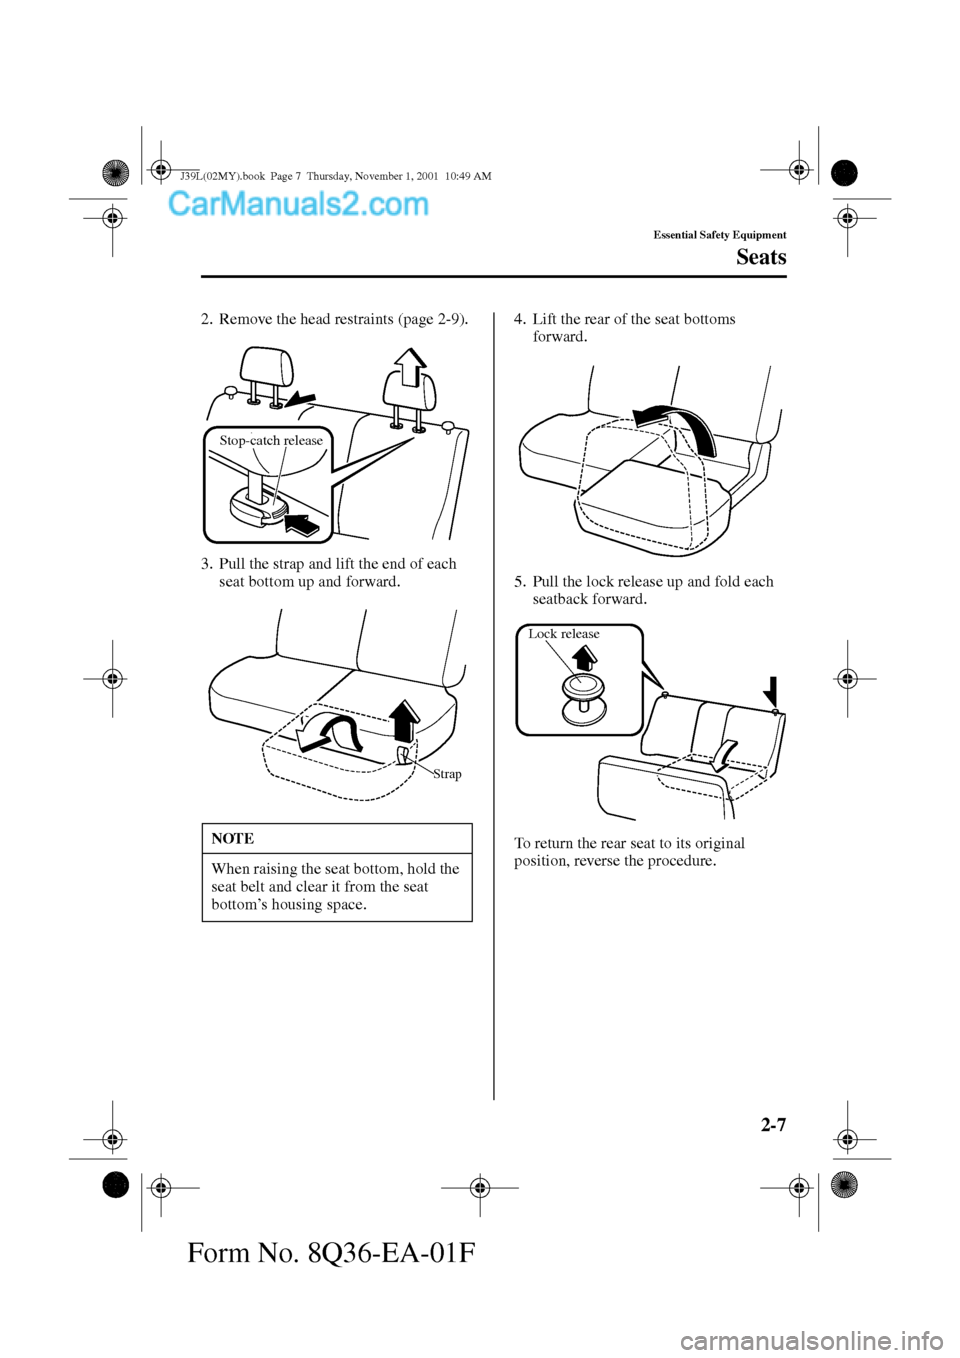 MAZDA MODEL PROTÉGÉ 2002   (in English) User Guide 2-7
Essential Safety Equipment
Seats
Form No. 8Q36-EA-01F
2. Remove the head restraints (page 2-9).
3. Pull the strap and lift the end of each 
seat bottom up and forward.4. Lift the rear of the seat 